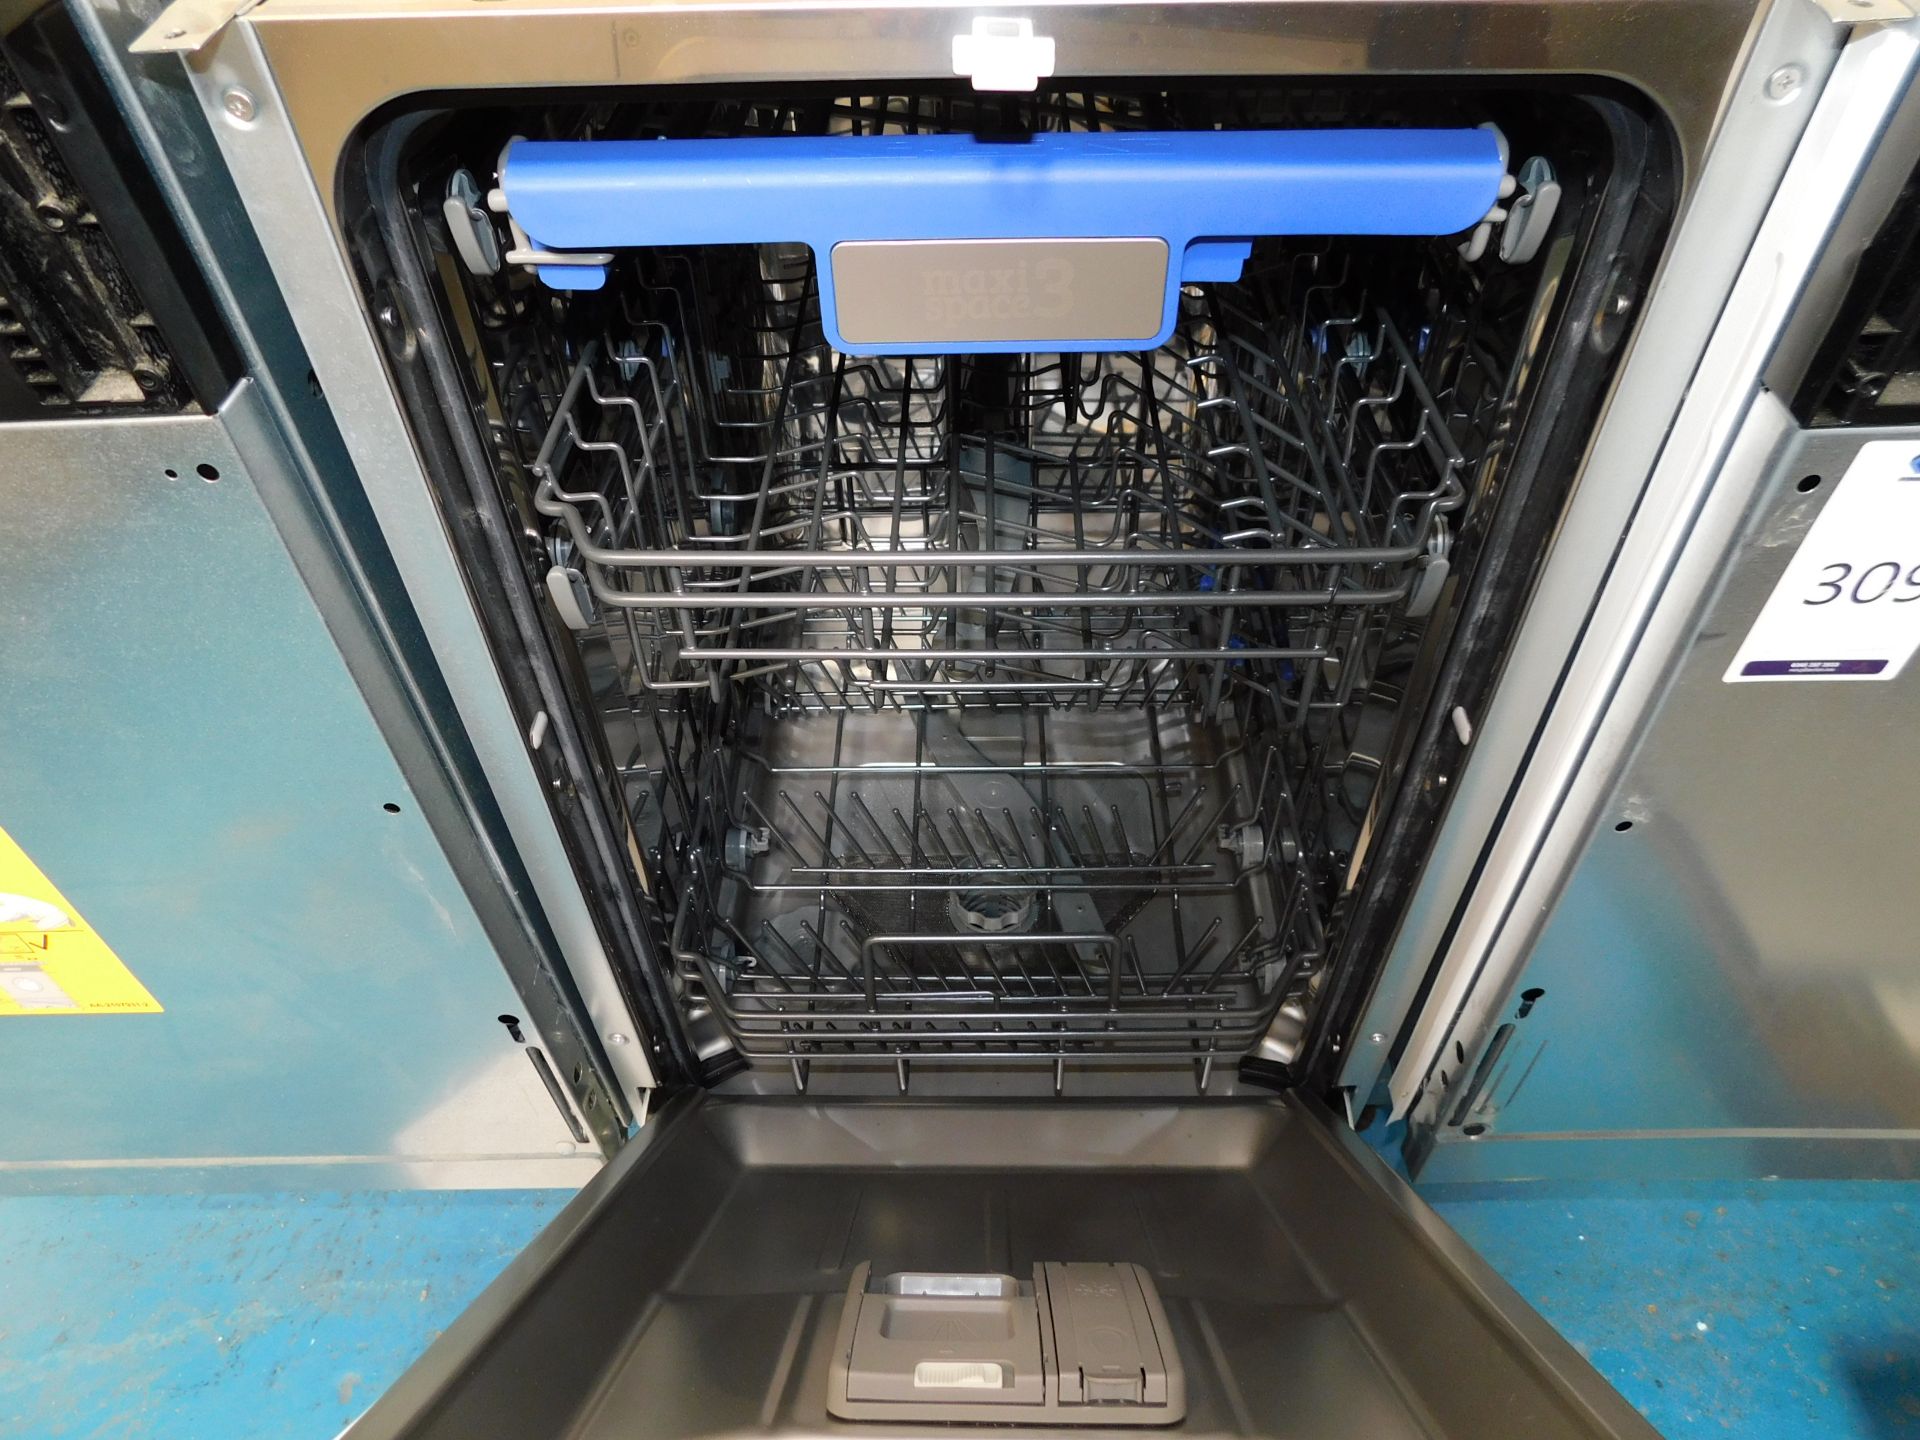 Amica ADI460 45cm Built-In Dishwasher (Narrow) (Location Walsall. Please Refer to General Notes) - Image 2 of 2